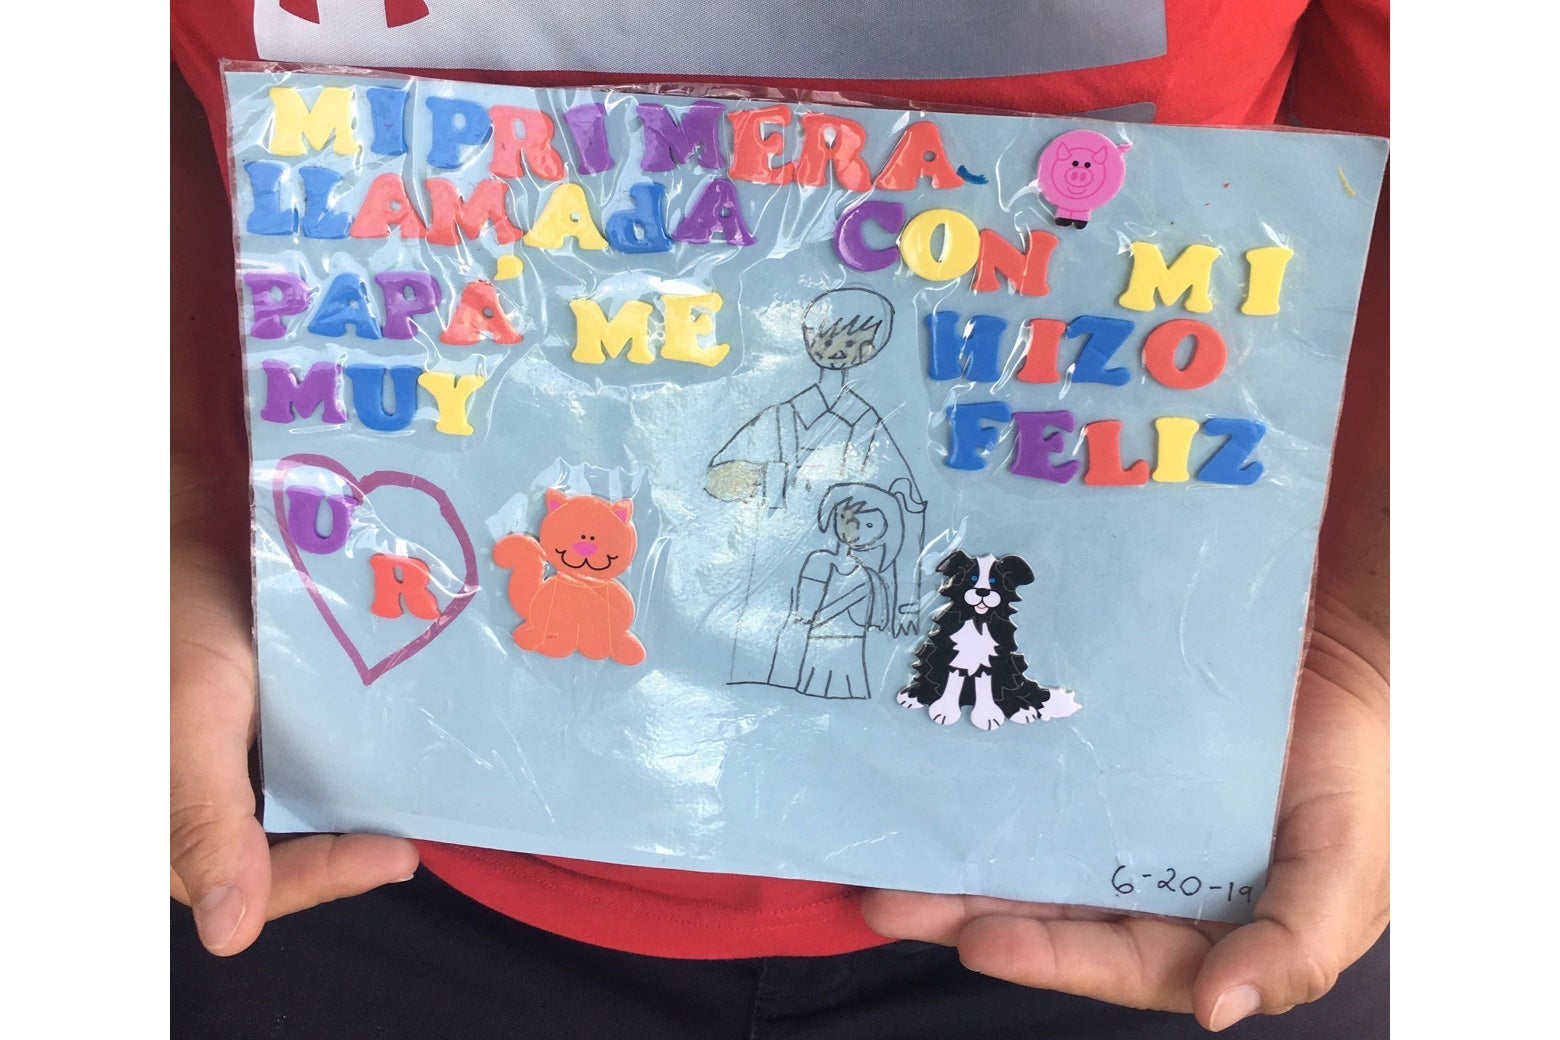 Hands hold up a laminated piece of paper featuring block letters, stickers, and a drawing.